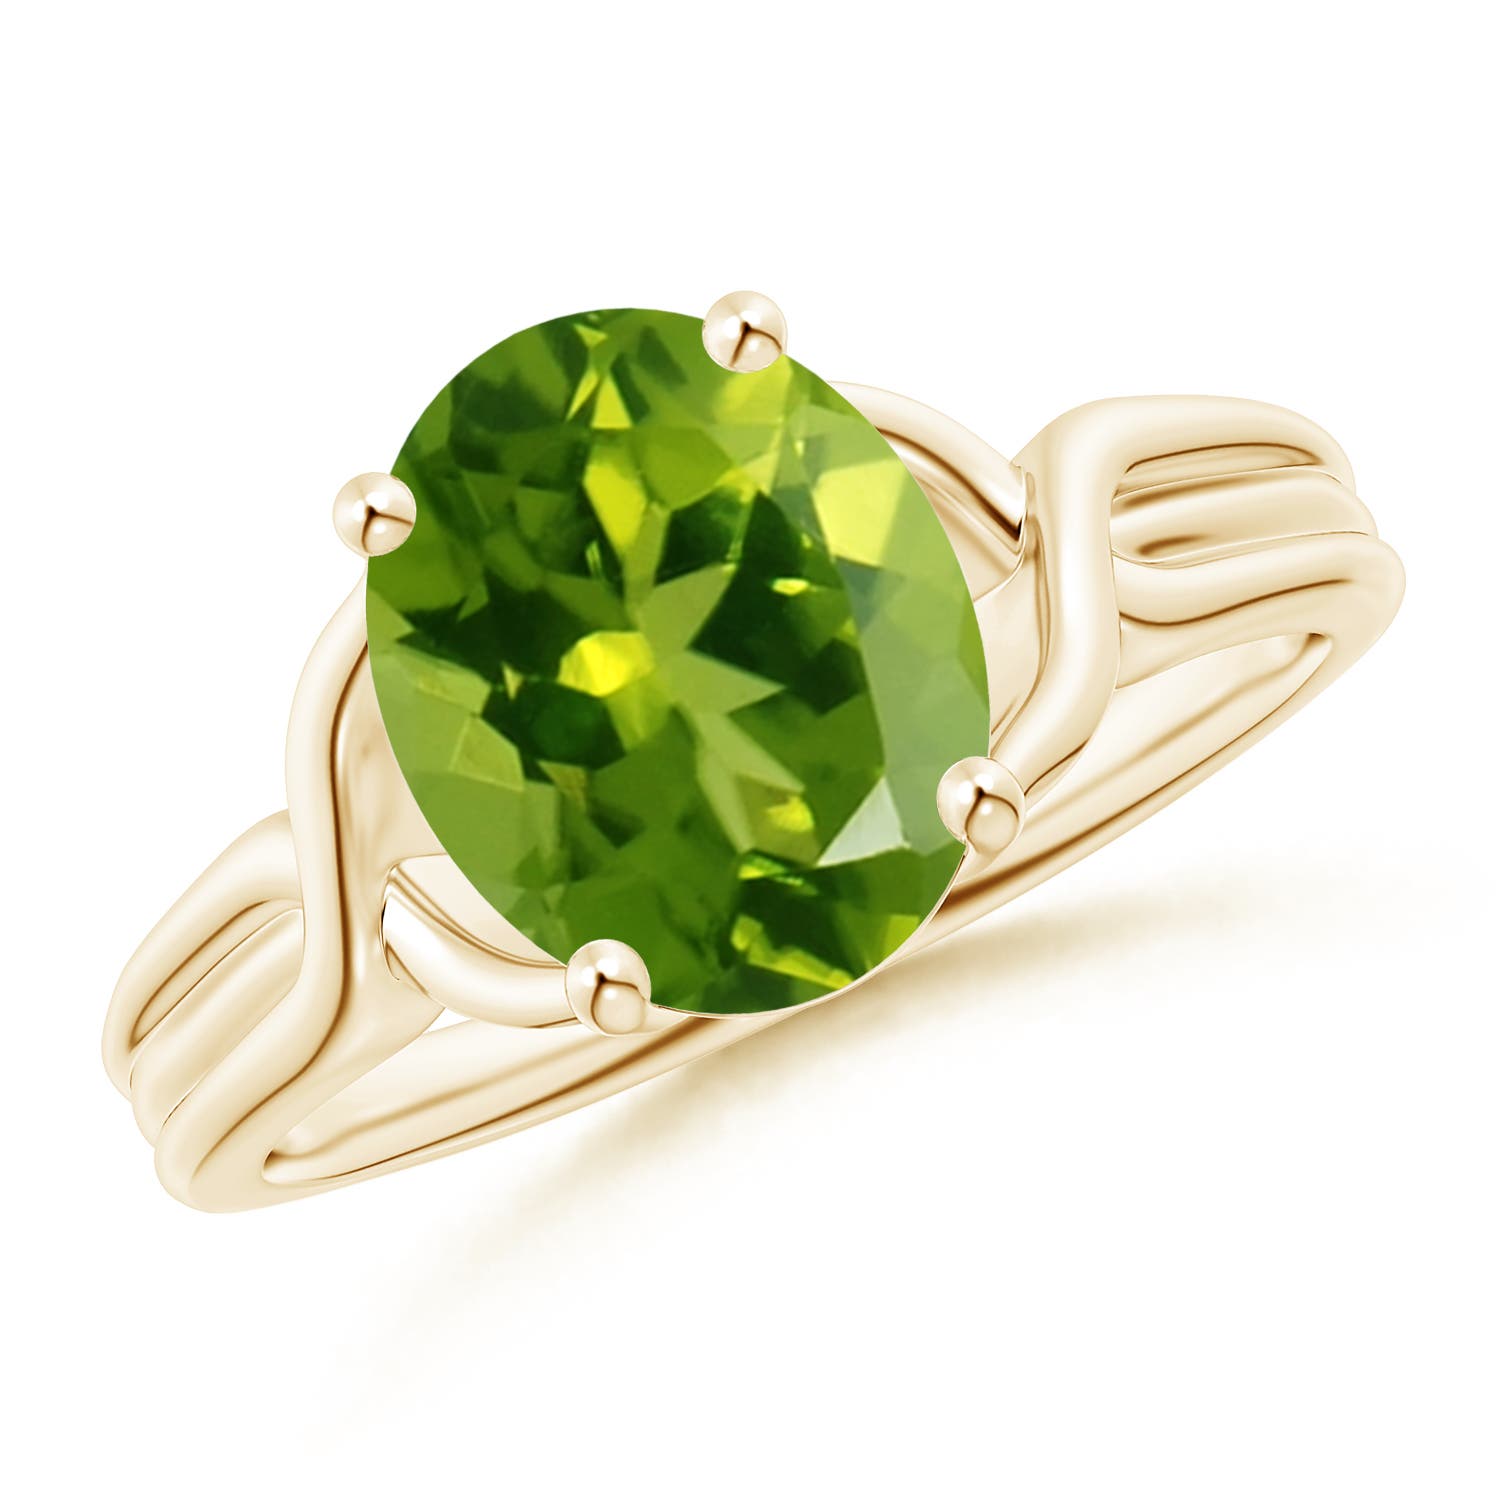 Peridot and Diamond Halo Ring in 18k White Gold (10x8mm)